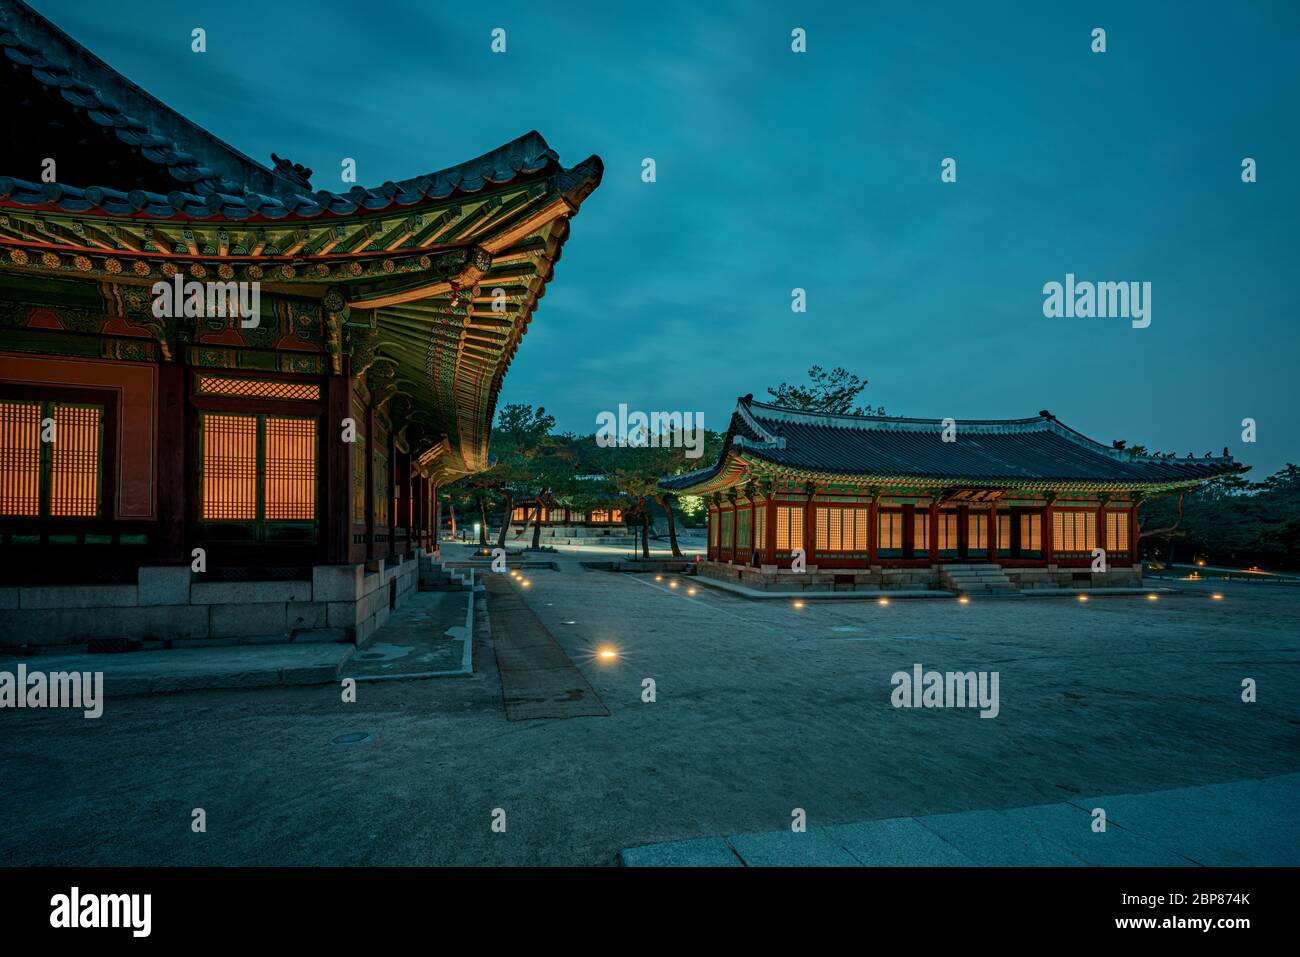 Seoul, South Korea - 17 May 2020: Changgyeonggung is one of the only palaces in Korea that offer regular night hours.  Lit up wonderfully at night, th Stock Photo